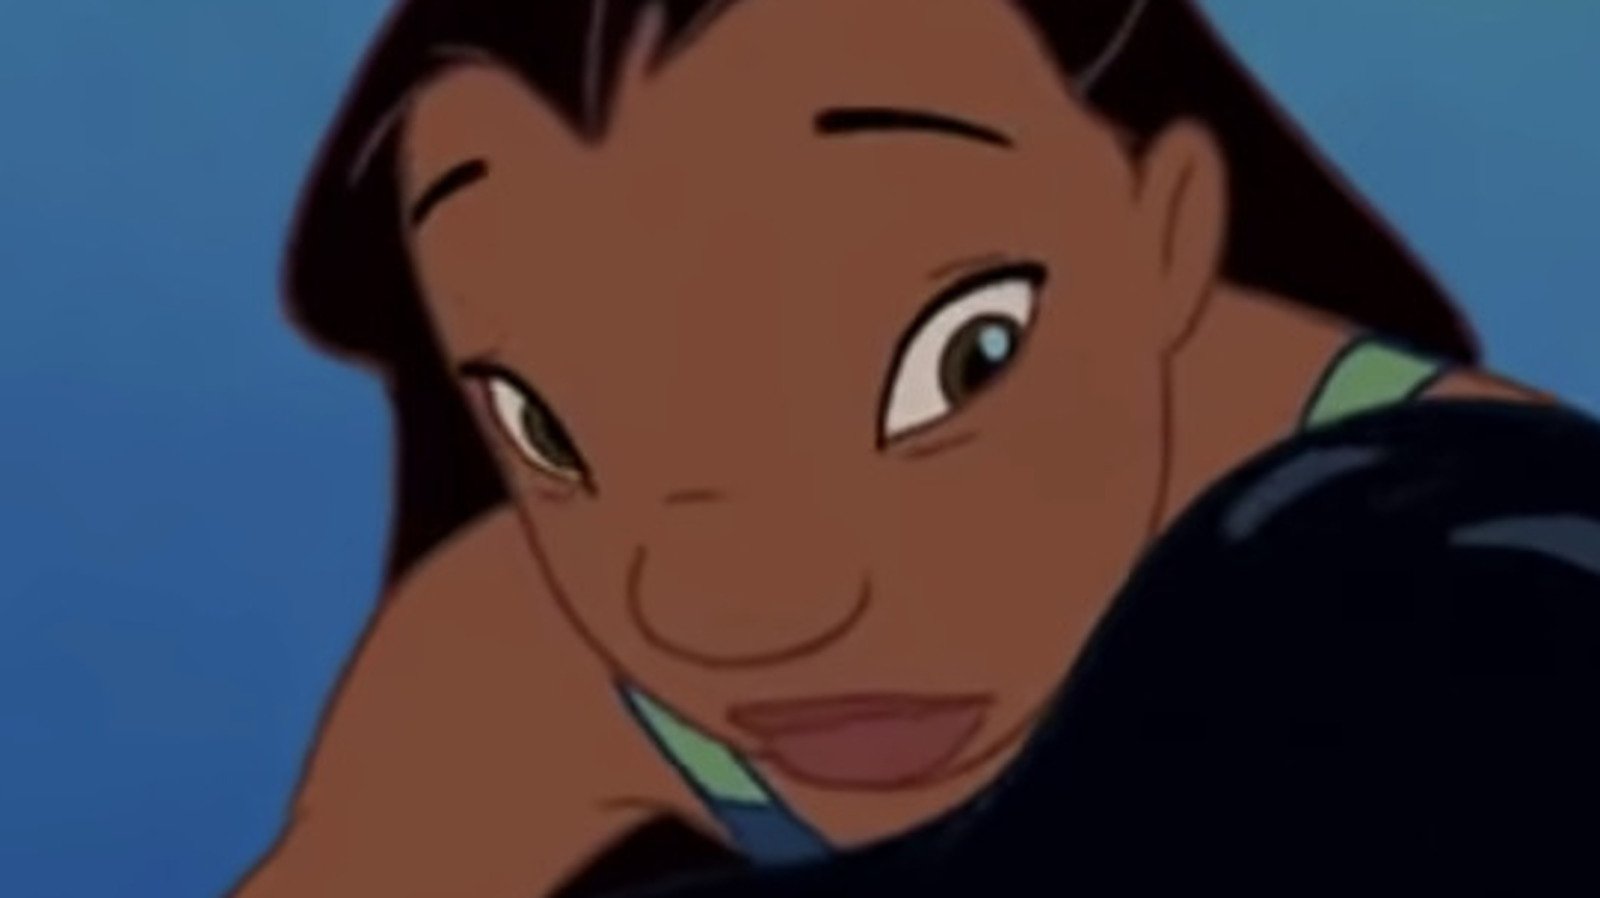 The Actress Who Played Nani Pelekai In Lilo & Stitch Is Gorgeous In Real Life   